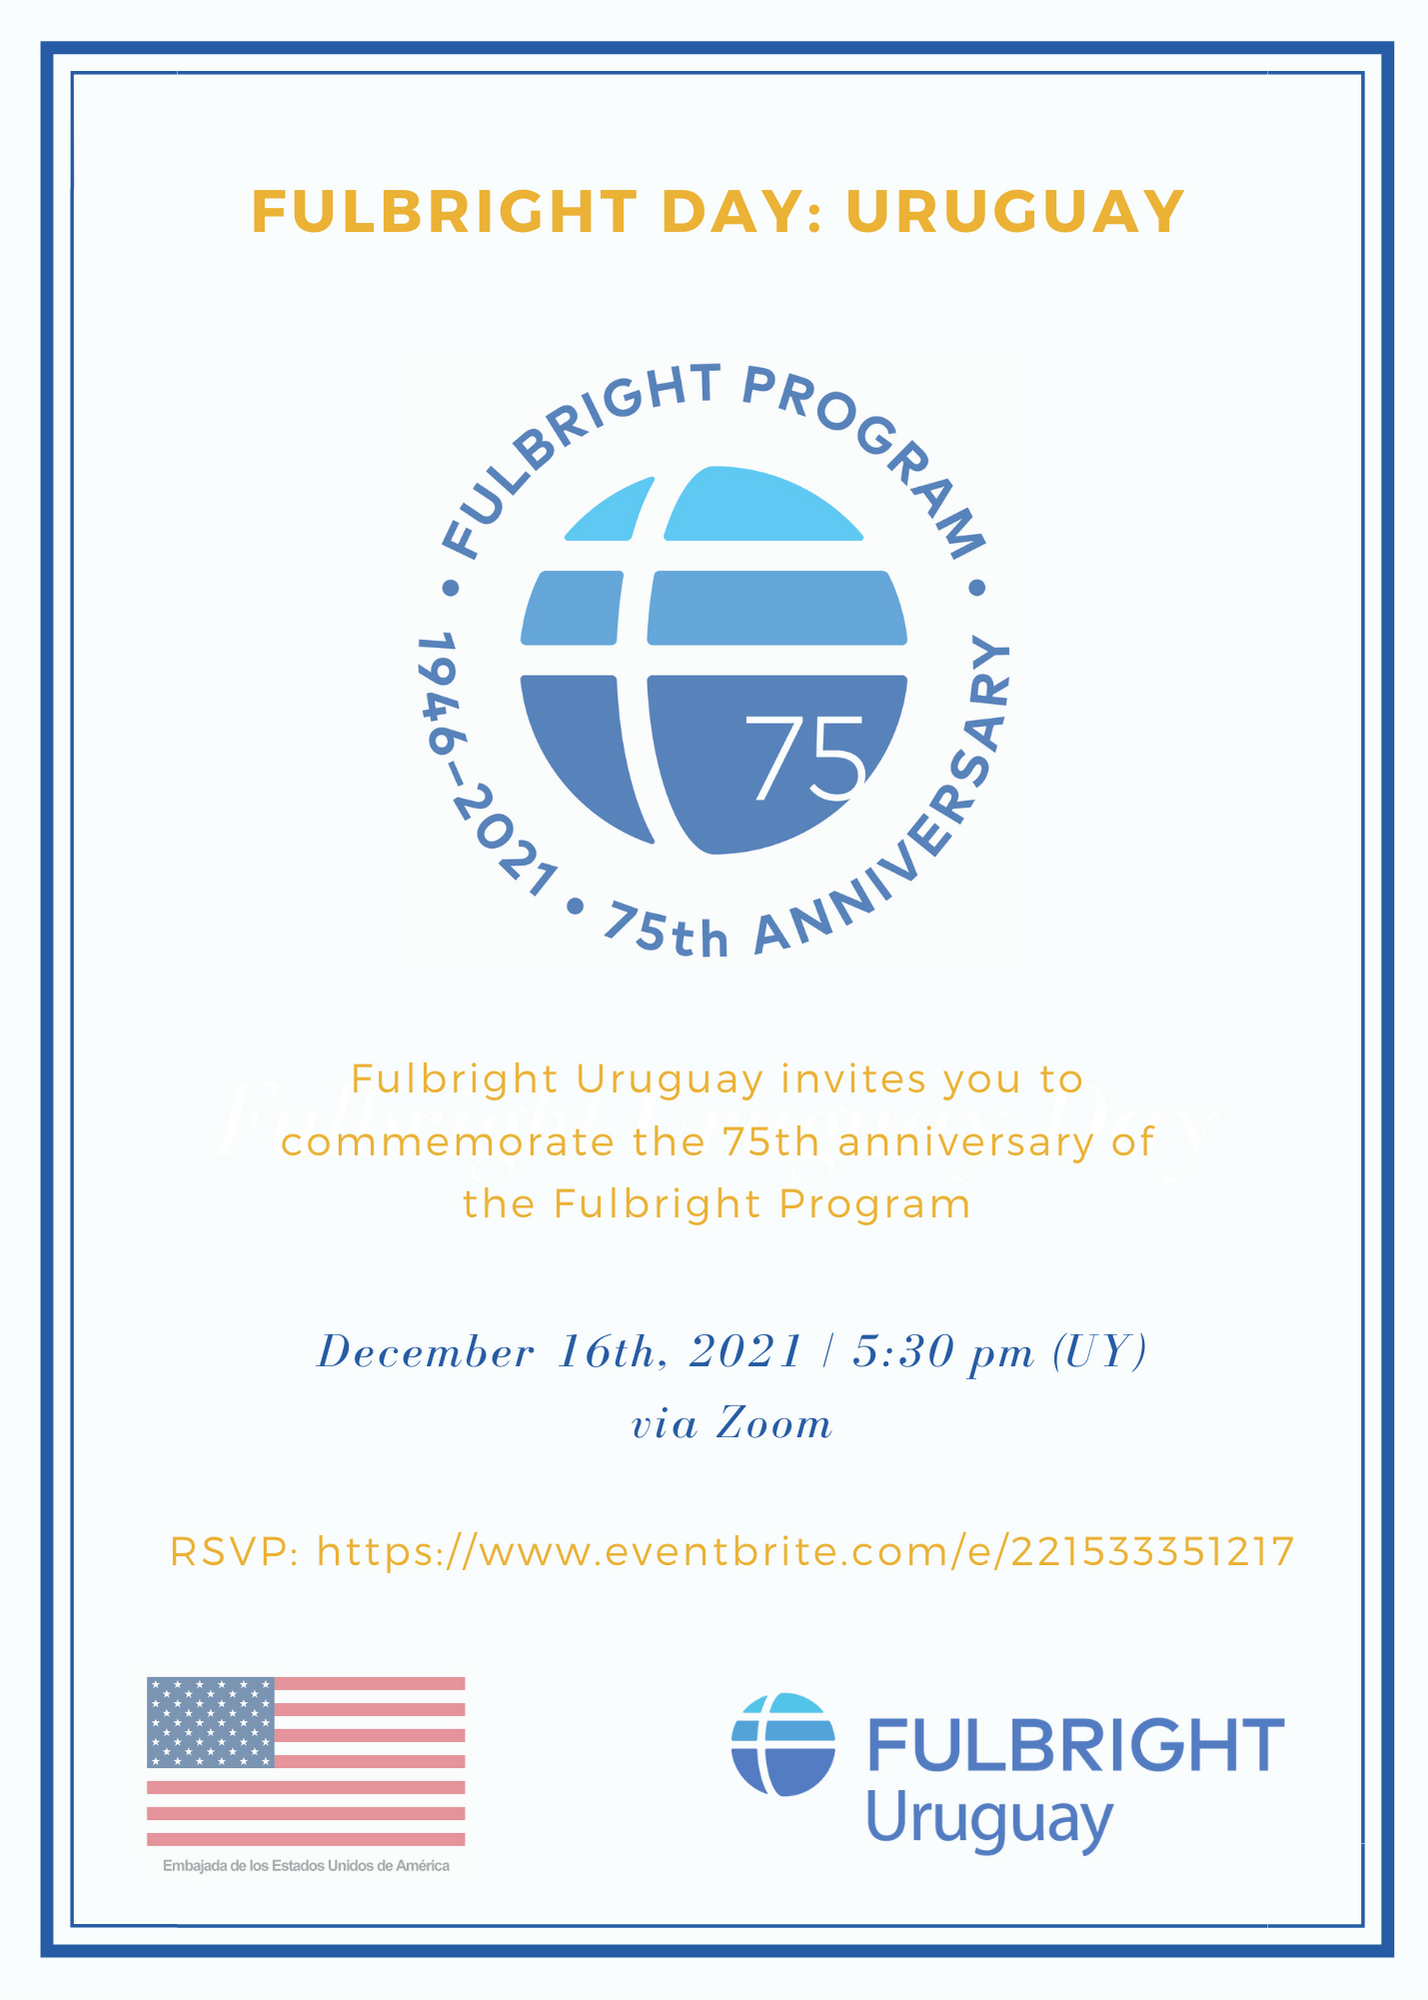 Promotional graphic for Fulbright Day Uruguay with Fulbright 75th seal, Fulbright Uruguay logo, and U.S. flag